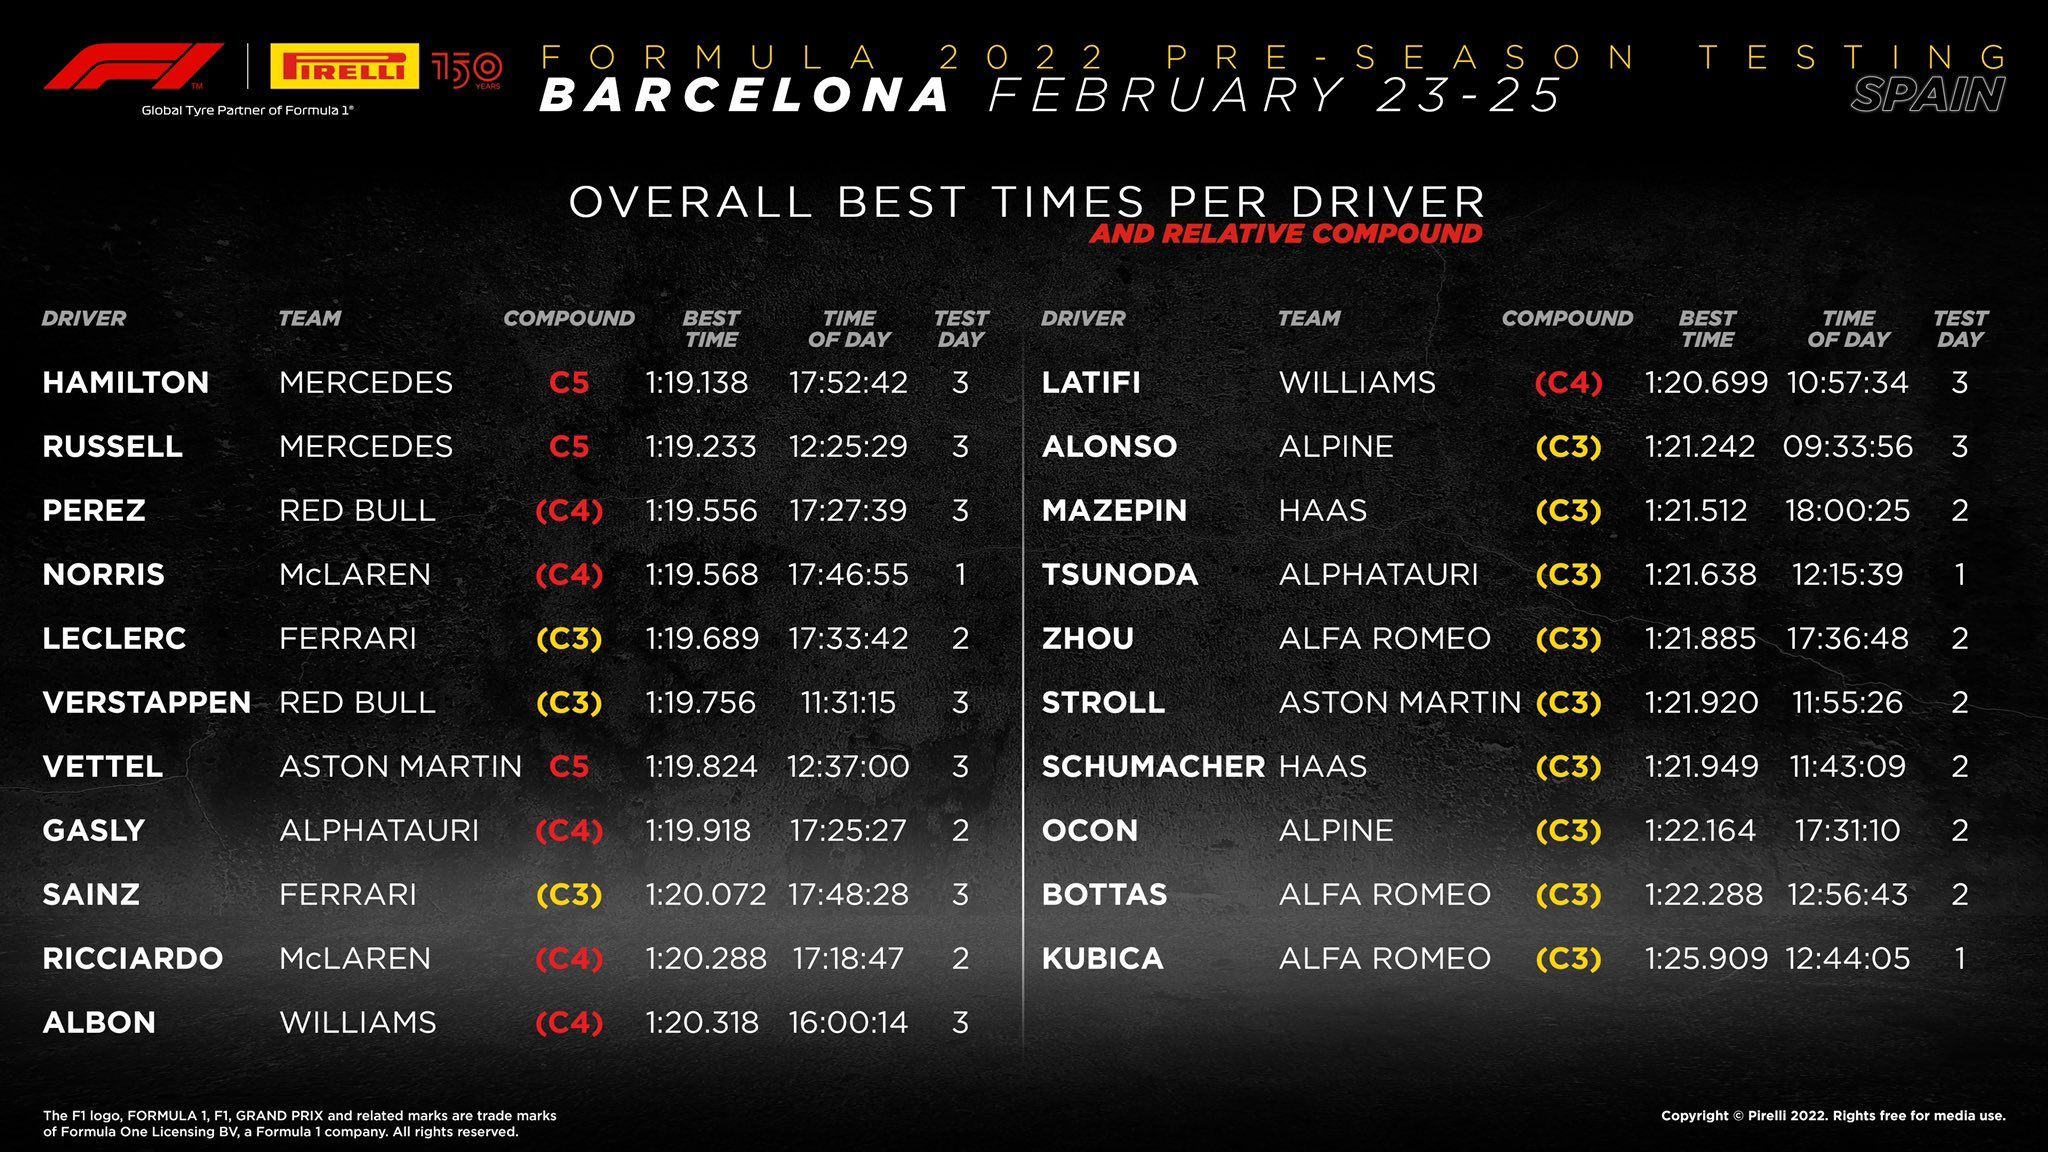 F1 2022 Lap count of drivers/teams, best times from Barcelona/Bahrain